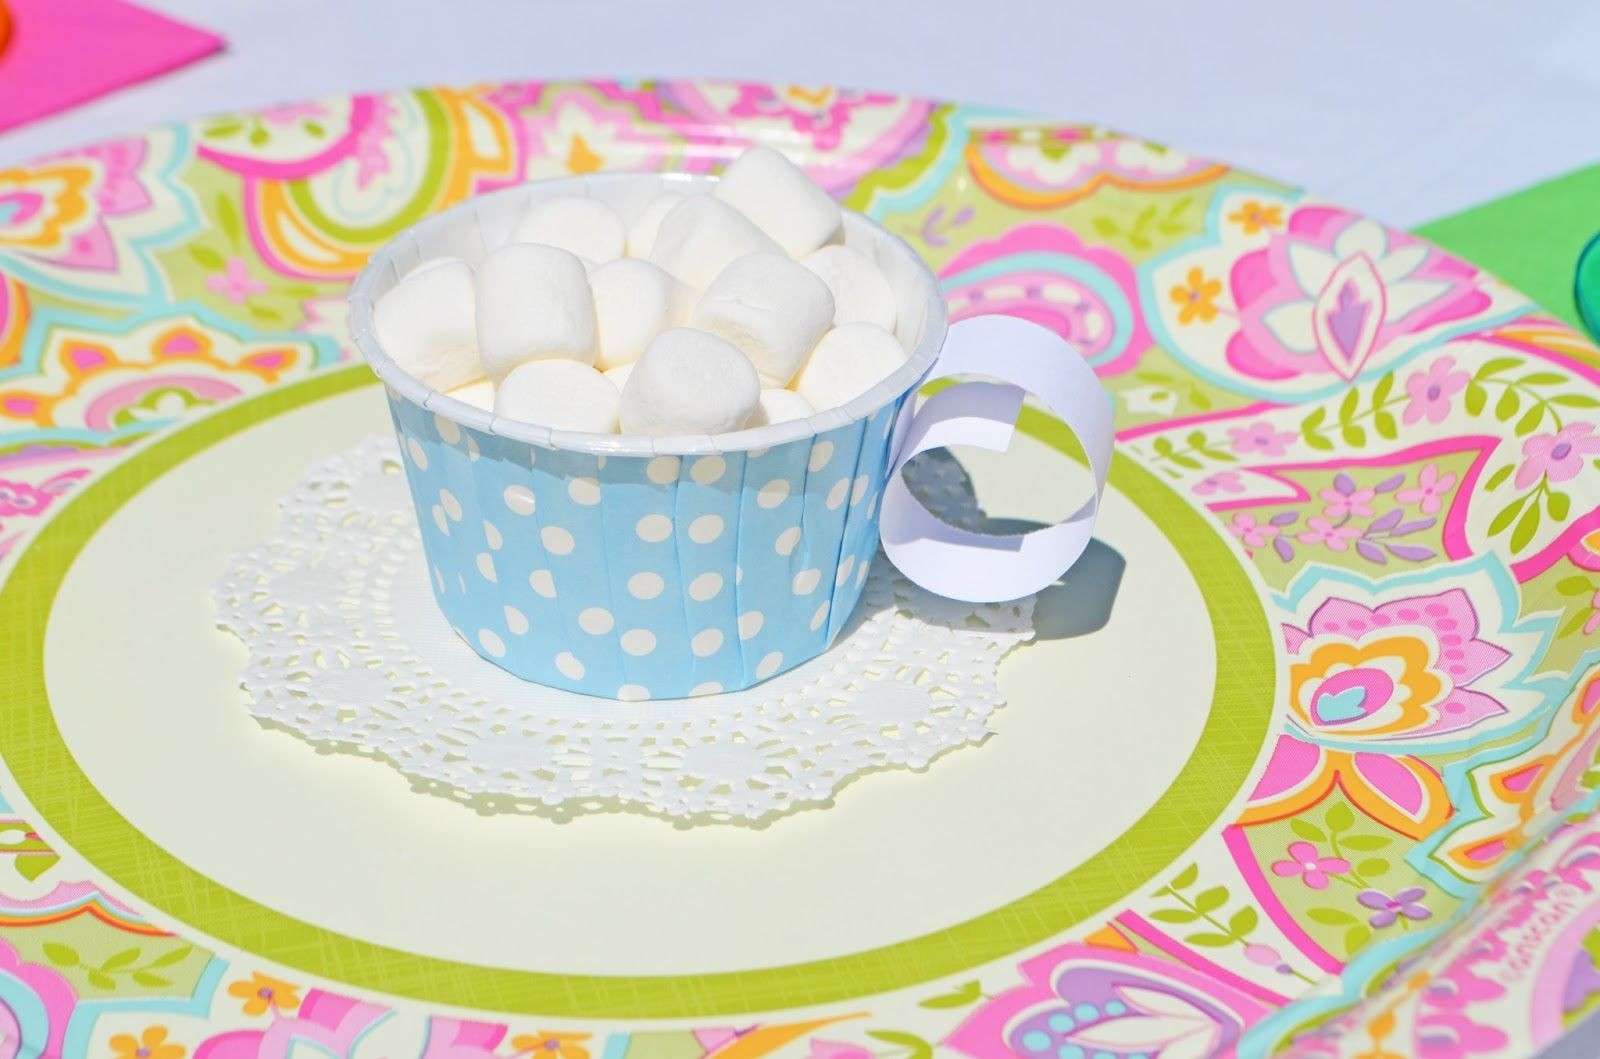 Tea Party Decoration Ideas Diy
 DIY Tea Cups perfect for an Alice in Wonderland Party